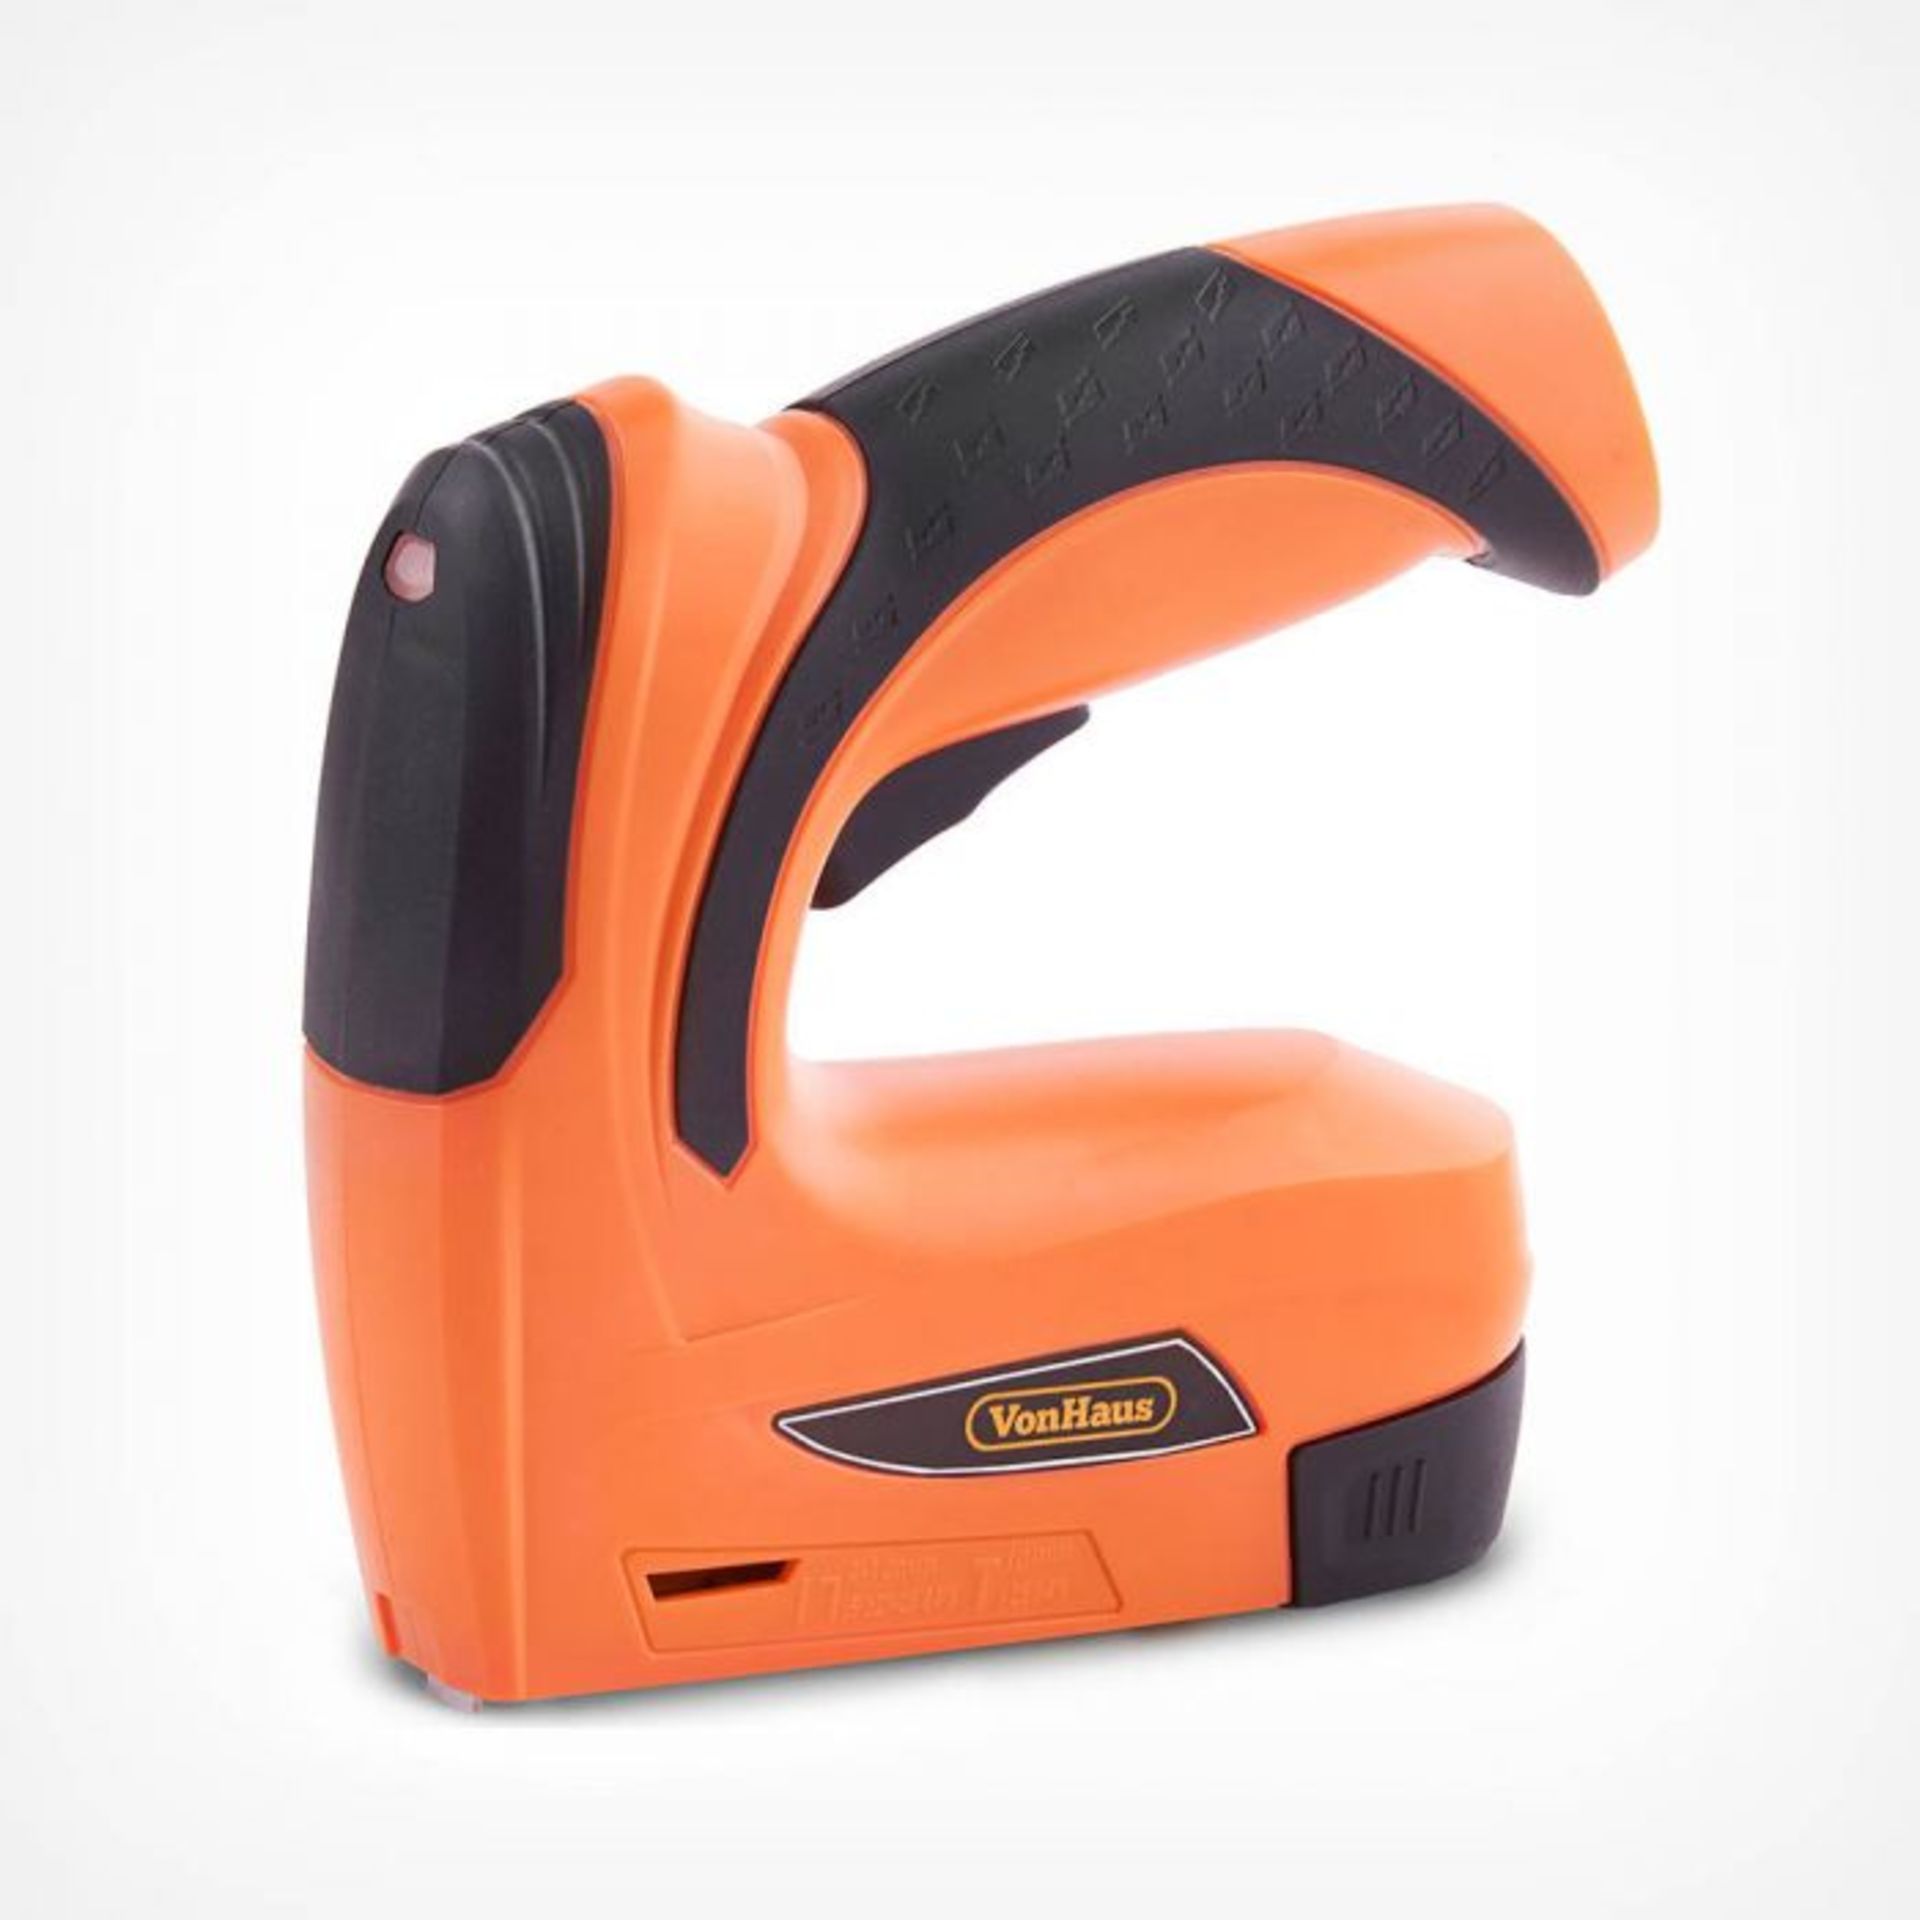 (S450) 3.6V Nailer & Stapler Ideal for crafting and decorating – quickly staple, nail or fa... - Image 2 of 4